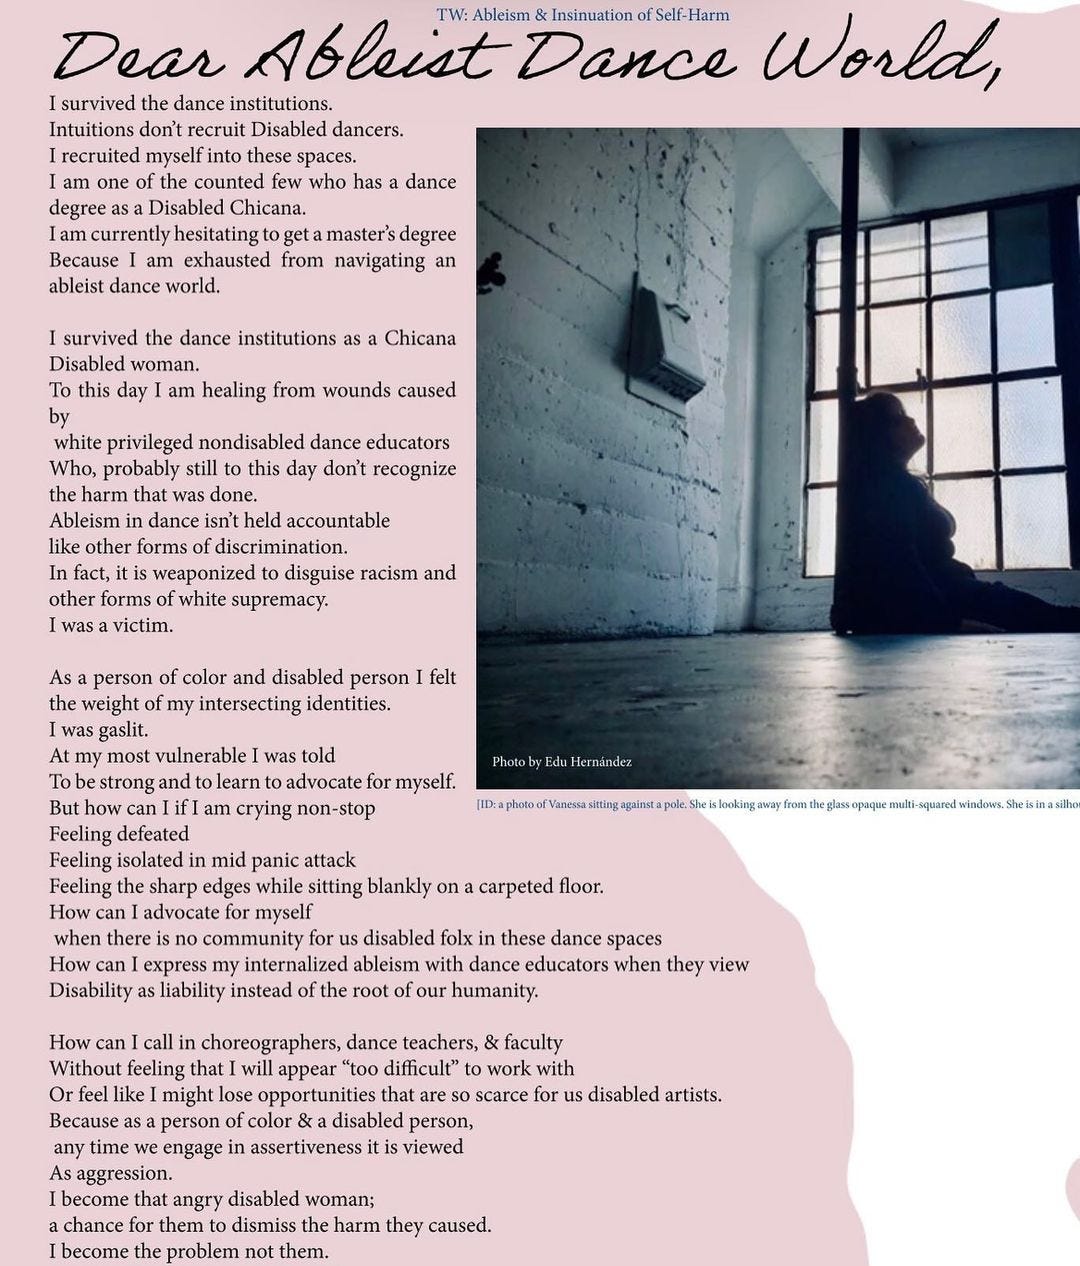 A portion of a magazine. The background is a pink texturized ripped paper on top of a white background. There is an image of Vanessa silhouette sitting against a pole. She is gazing towards a multi-squared window.  TW: Ableism & Insinuation of Self-HarmDear Ableist Dance World,I survived the dance institutions.Intuitions don't recruit Disabled dancers.I recruited myself into these spaces.I am one of the counted few who has a dancedegree as a Disabled Chicana.I am currently hesitating to get a master's degreeBecause I am exhausted from navigating anableist dance world.I survived the dance institutions as a ChicanaDisabled woman.To this day I am healing from wounds causedbywhite privileged nondisabled dance educatorsWho, probably still to this day don't recognize the harm that was done.Ableism in dance isn't held accountablelike other forms of discrimination.In fact, it is weaponized to disguise racism and other forms of white supremacy.I was a victim.As a person of color and disabled person I felt the weight of my intersecting identities.I was gaslit.At my most vulnerable I was toldTo be strong and to learn to advocate for myself.But how can I if I am crying non-stopFeeling defeatedFeeling isolated in mid panic attackFeeling the sharp edges while sitting blankly on a carpeted floor.How can I advocate for myselfwhen there is no community for us disabled folx in these dance spacesHow can I express my internalized ableism with dance educators when they viewDisability as liability instead of the root of our humanity.How can I call in choreographers, dance teachers, & facultyWithout feeling that I will appear "too difficult" to work withOr feel like I might lose opportunities that are so scarce for us disabled artists.Because as a person of color & a disabled person,any time we engage in assertiveness it is viewedAs aggression.I become that angry disabled woman;a chance for them to dismiss the harm they caused.I become the problem not them.